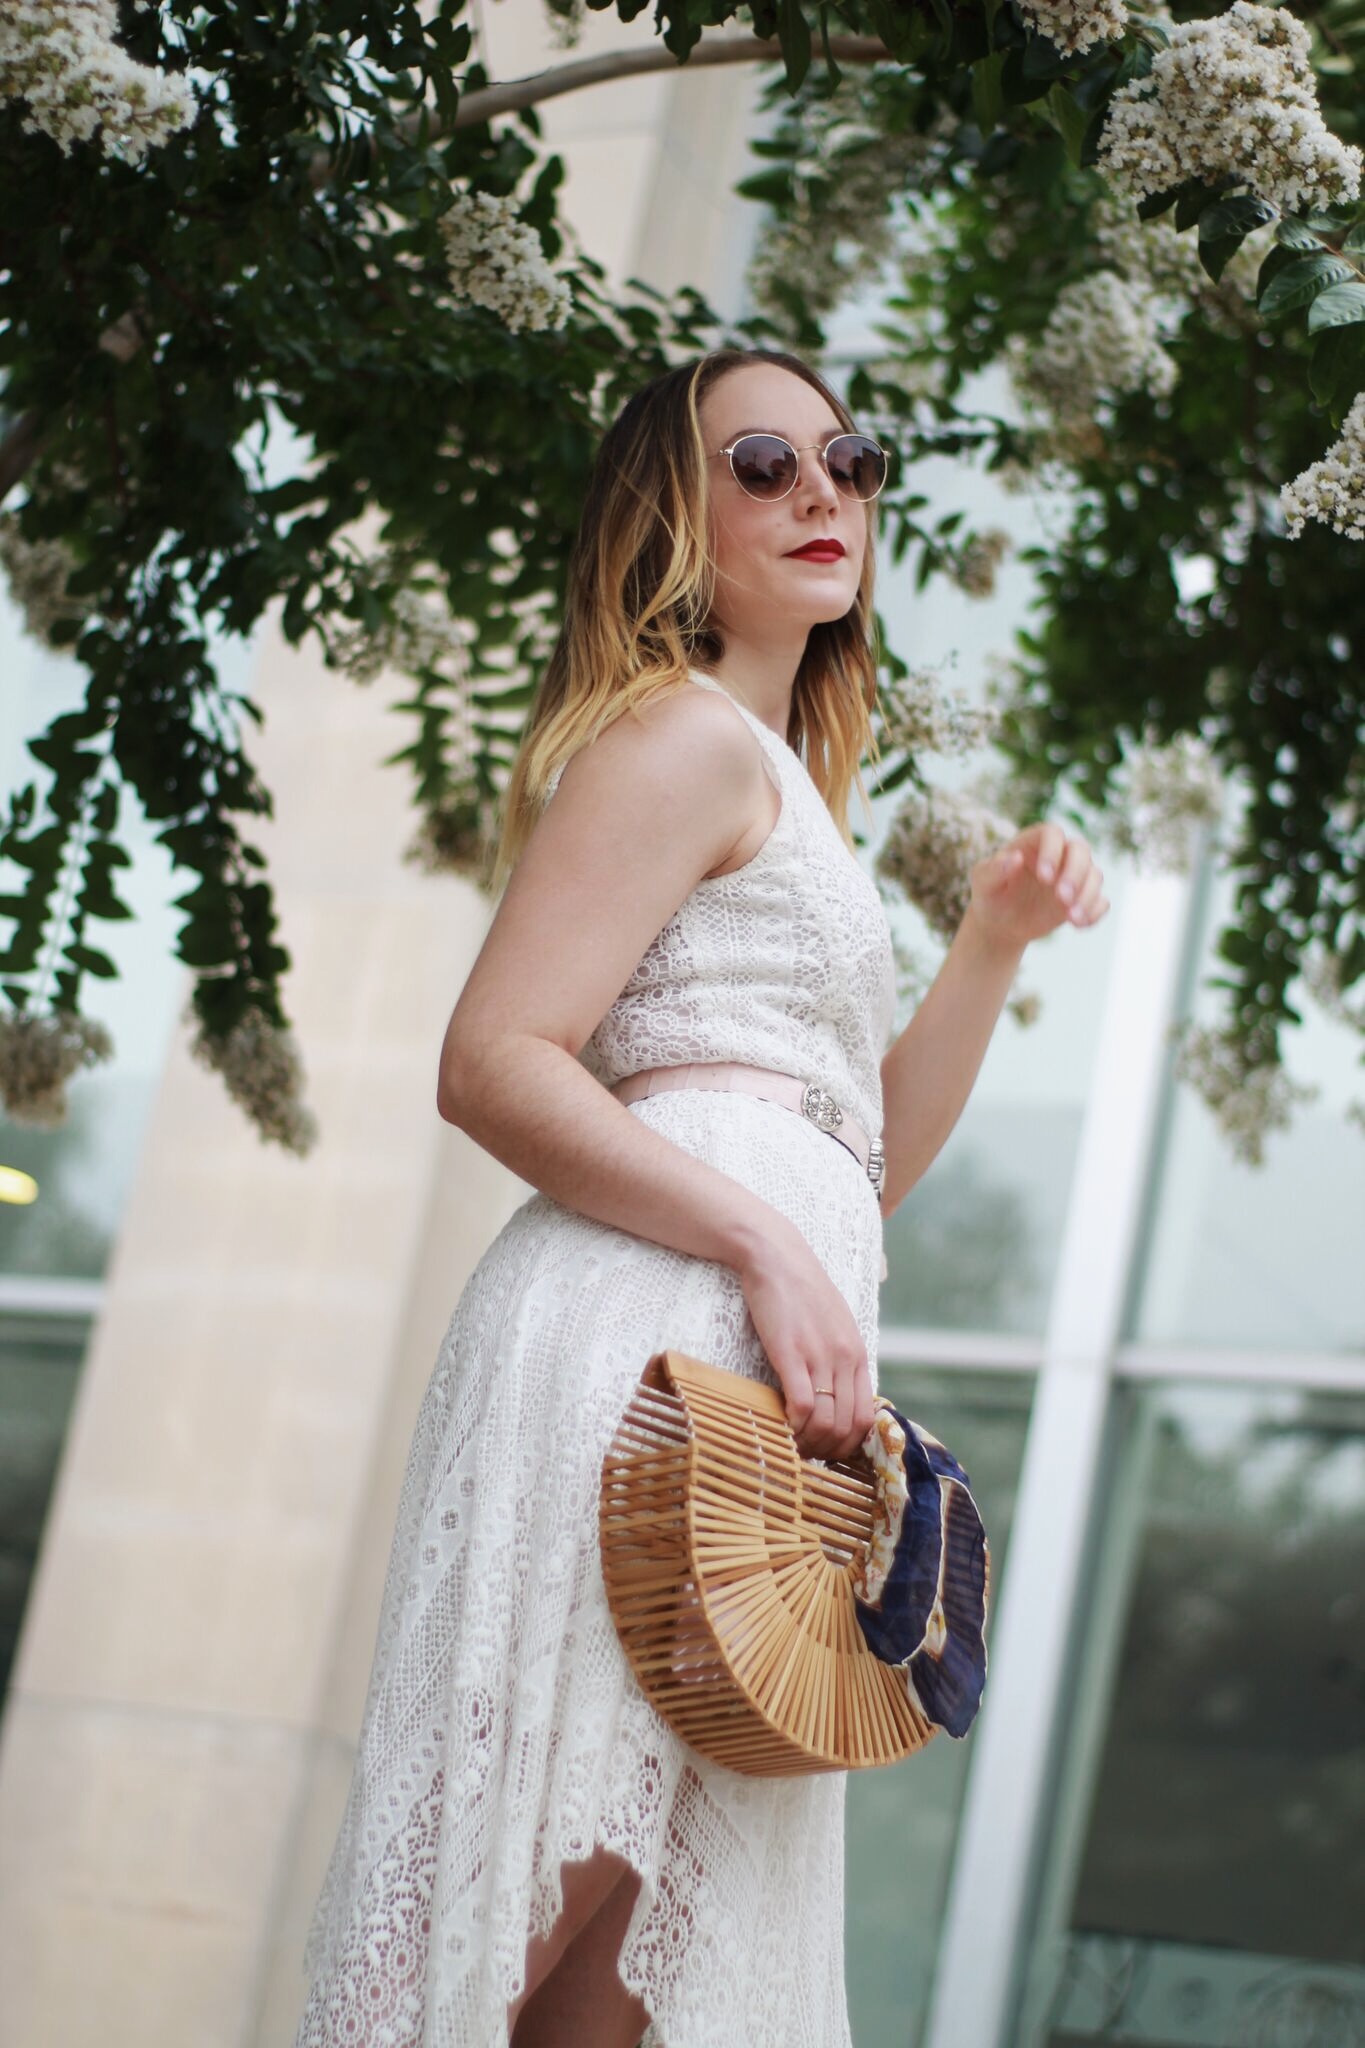 How to Accessorize a Little White Dress